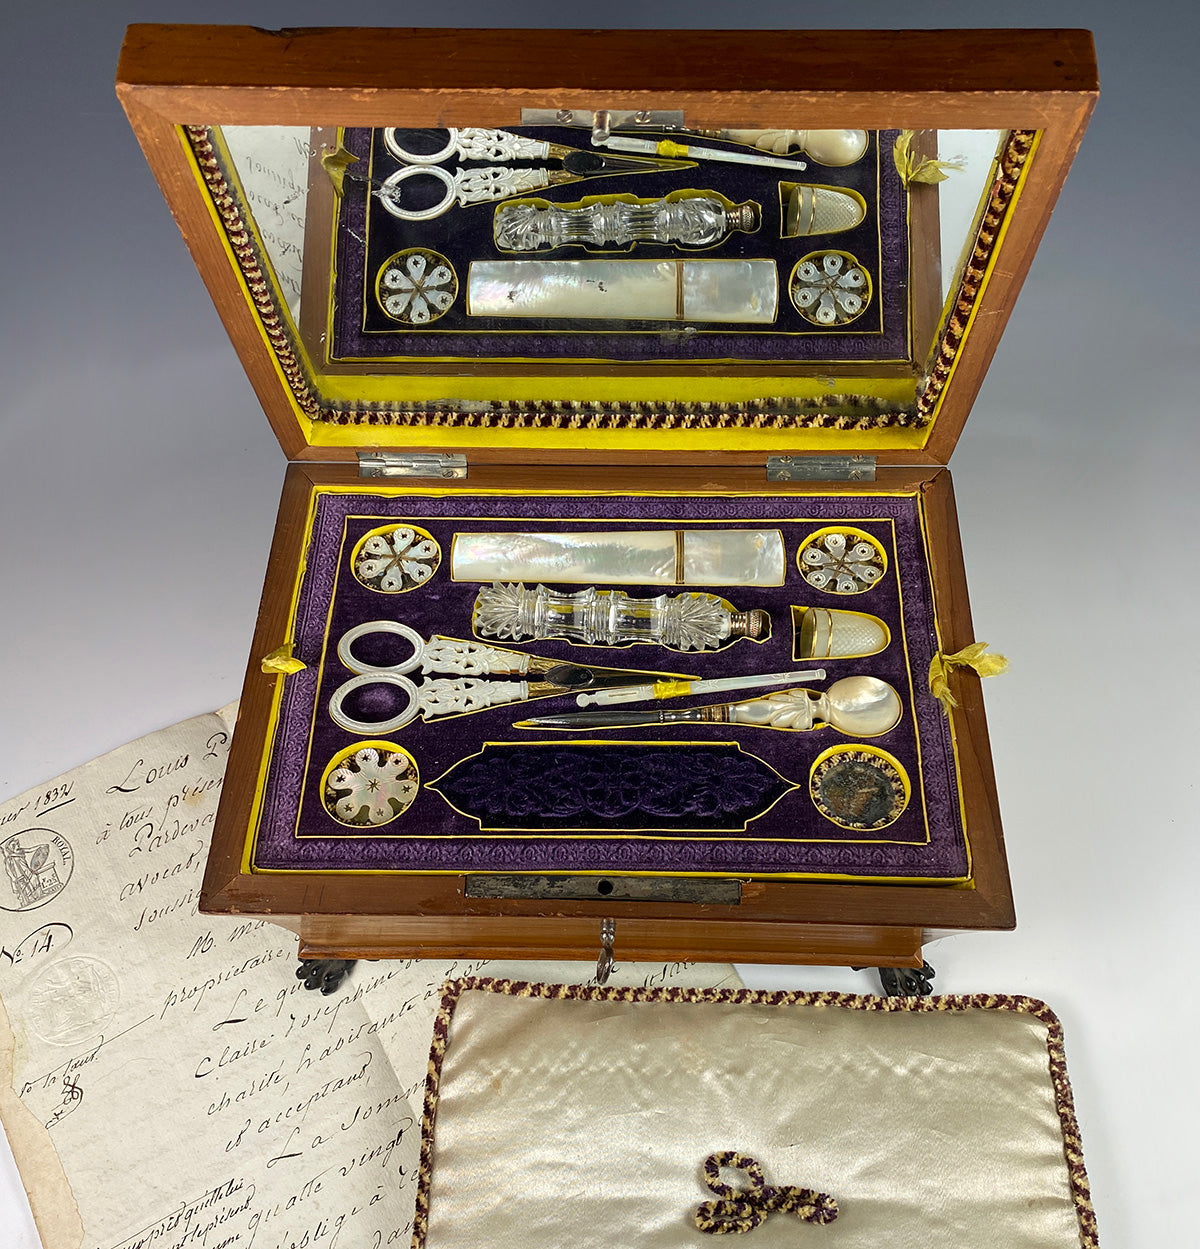 Superb Antique c.1810 French Palais Royal Sewing Box, Chest, Mother of Pearl and 18k Gold Tools, Perfume